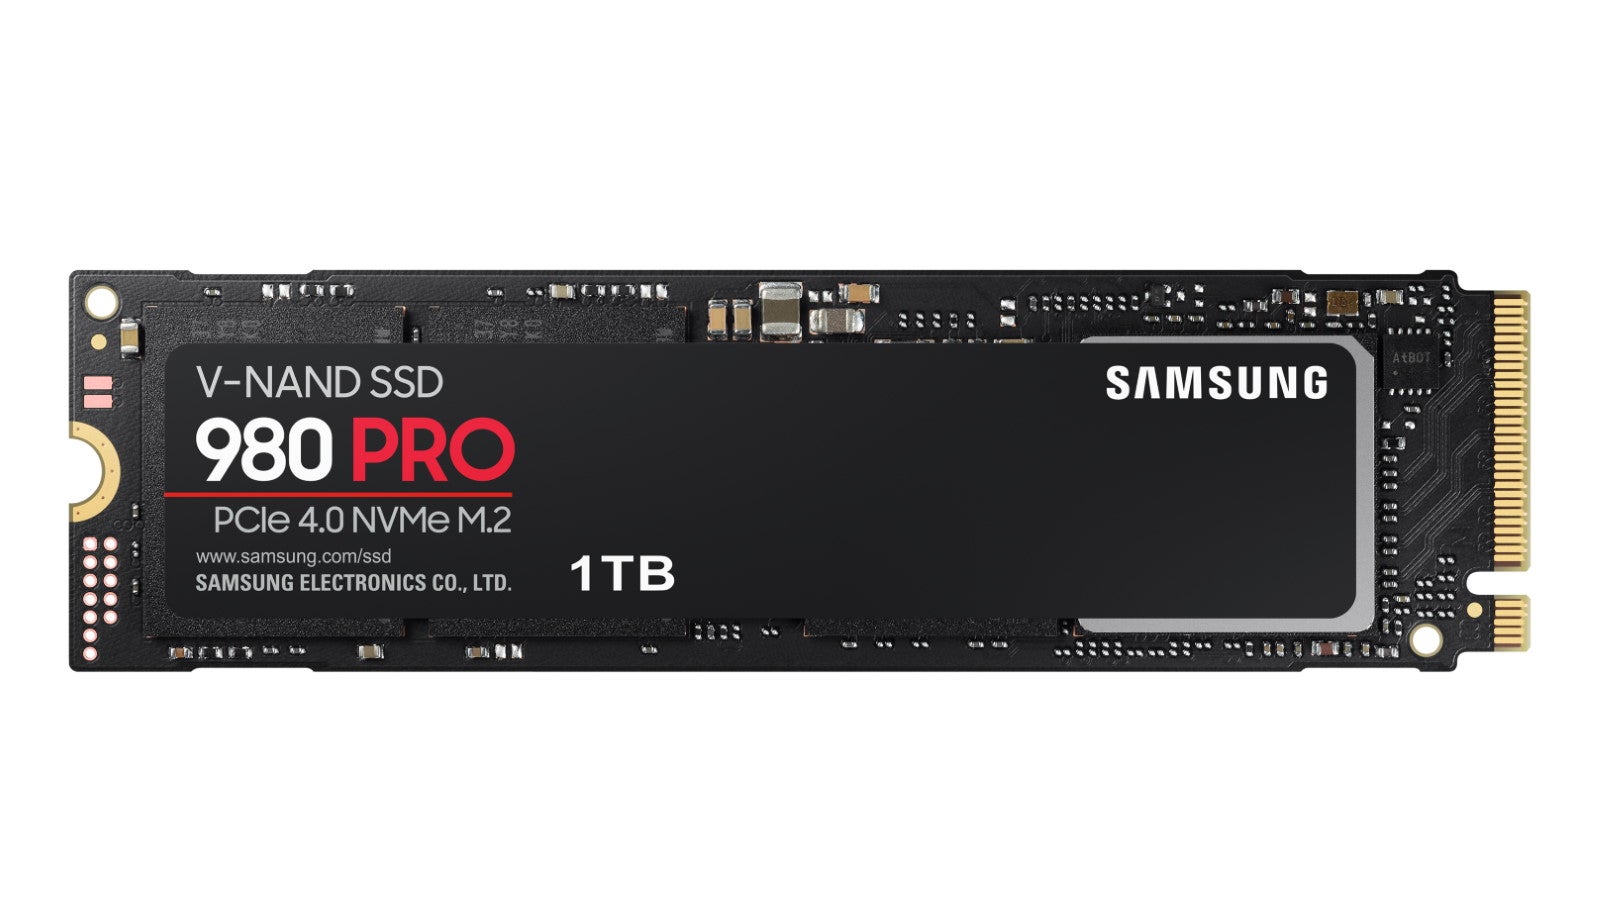 Image for Black Friday deal spotlight: Speed up your storage with the Samsung 980 Pro 1TB SSD